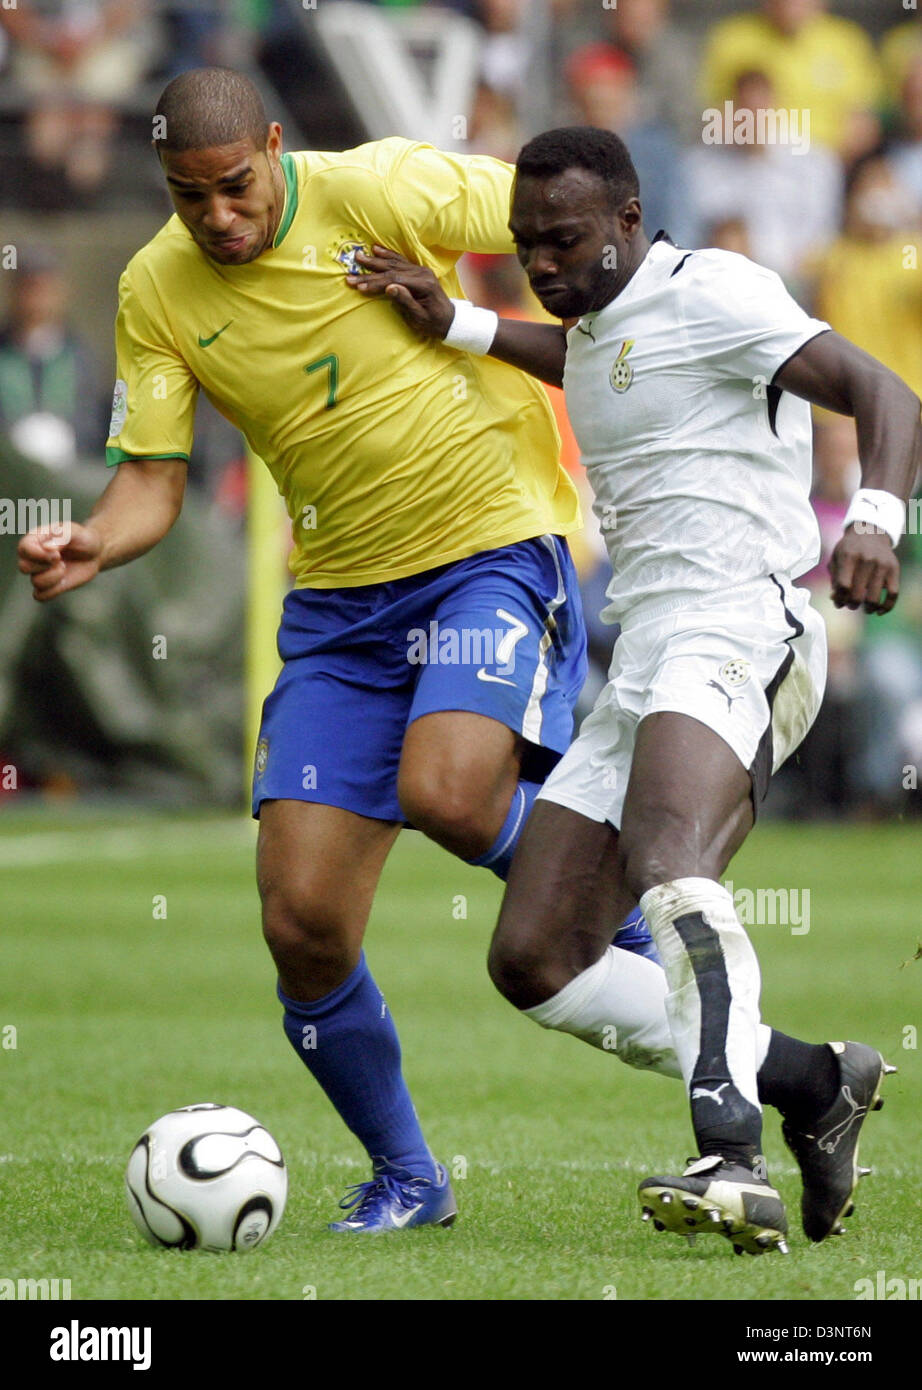 Adriano (L) from Brazil vies with John Mensah (R) from Ghana during the 2nd round match of the 2006 FIFA World Cup between Brazil and Ghana in Dortmund, Germany, Tuesday, 27 June 2006. Photo: BERND THISSEN +++ Mobile Services OUT +++ Please refer to FIFA's terms and conditions Stock Photo